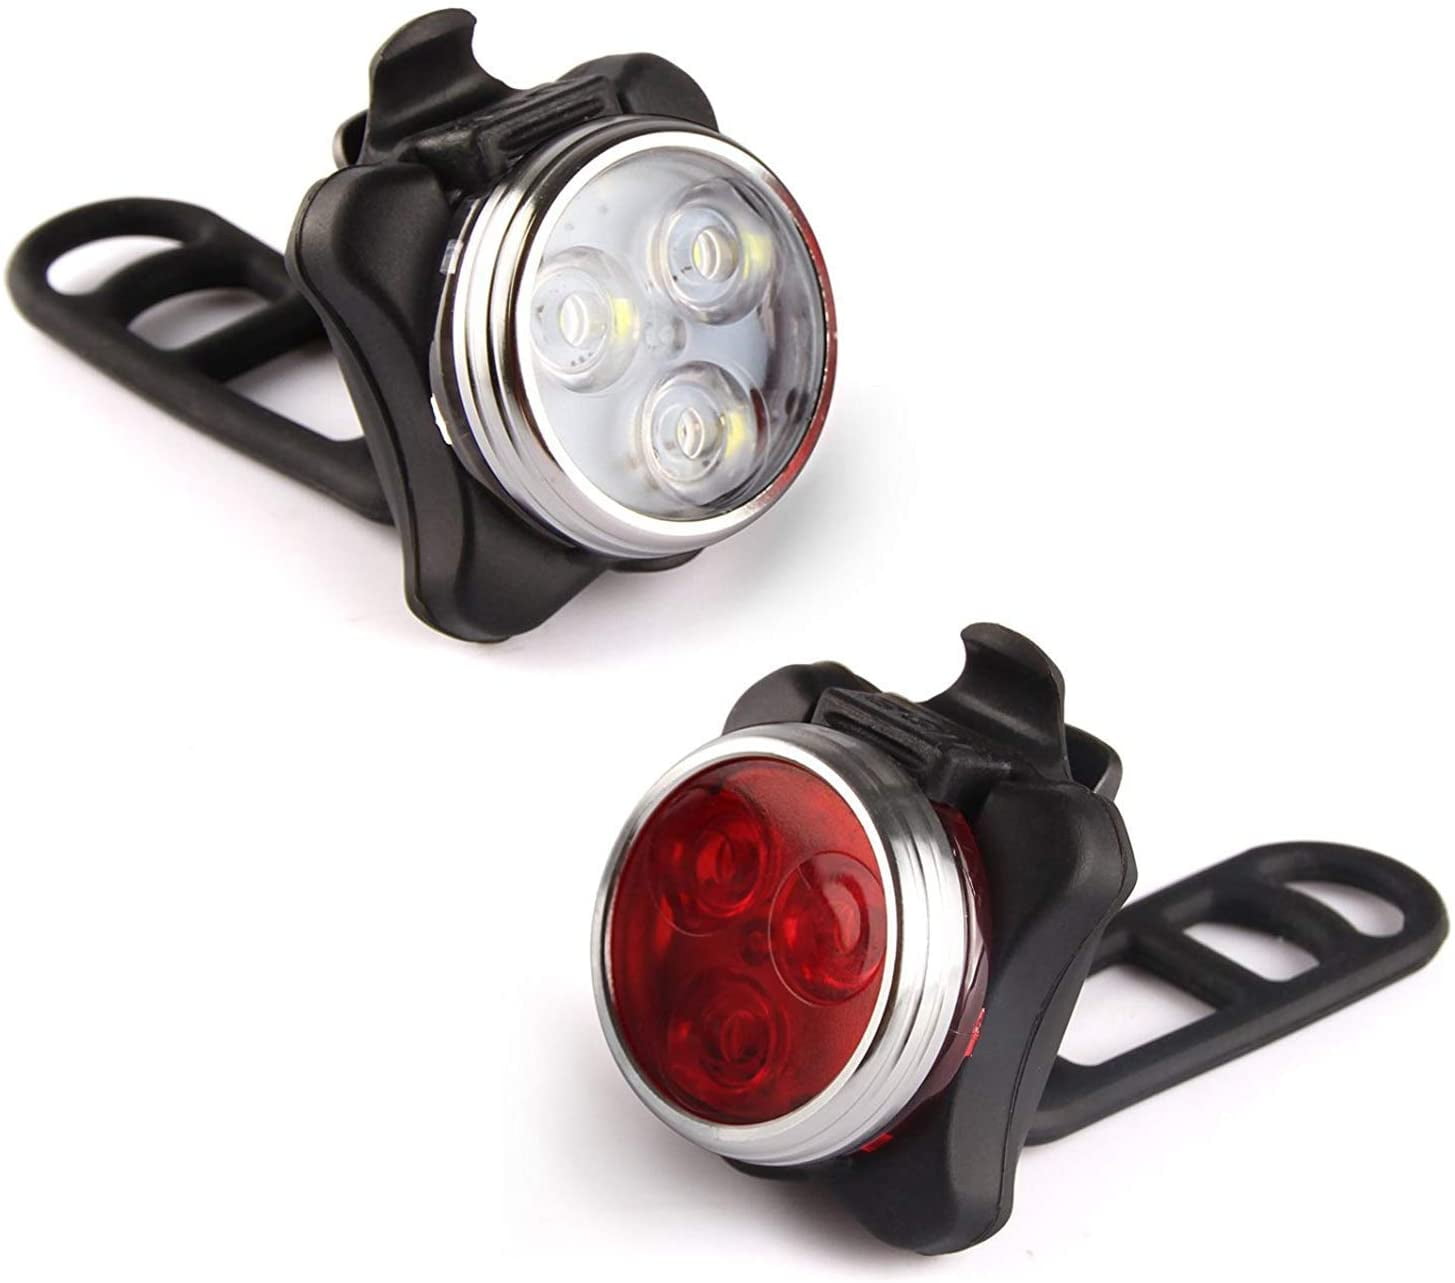 NEW Rechargeable Bright LED Bike Lights Set Headlight Taillight Combinations LED